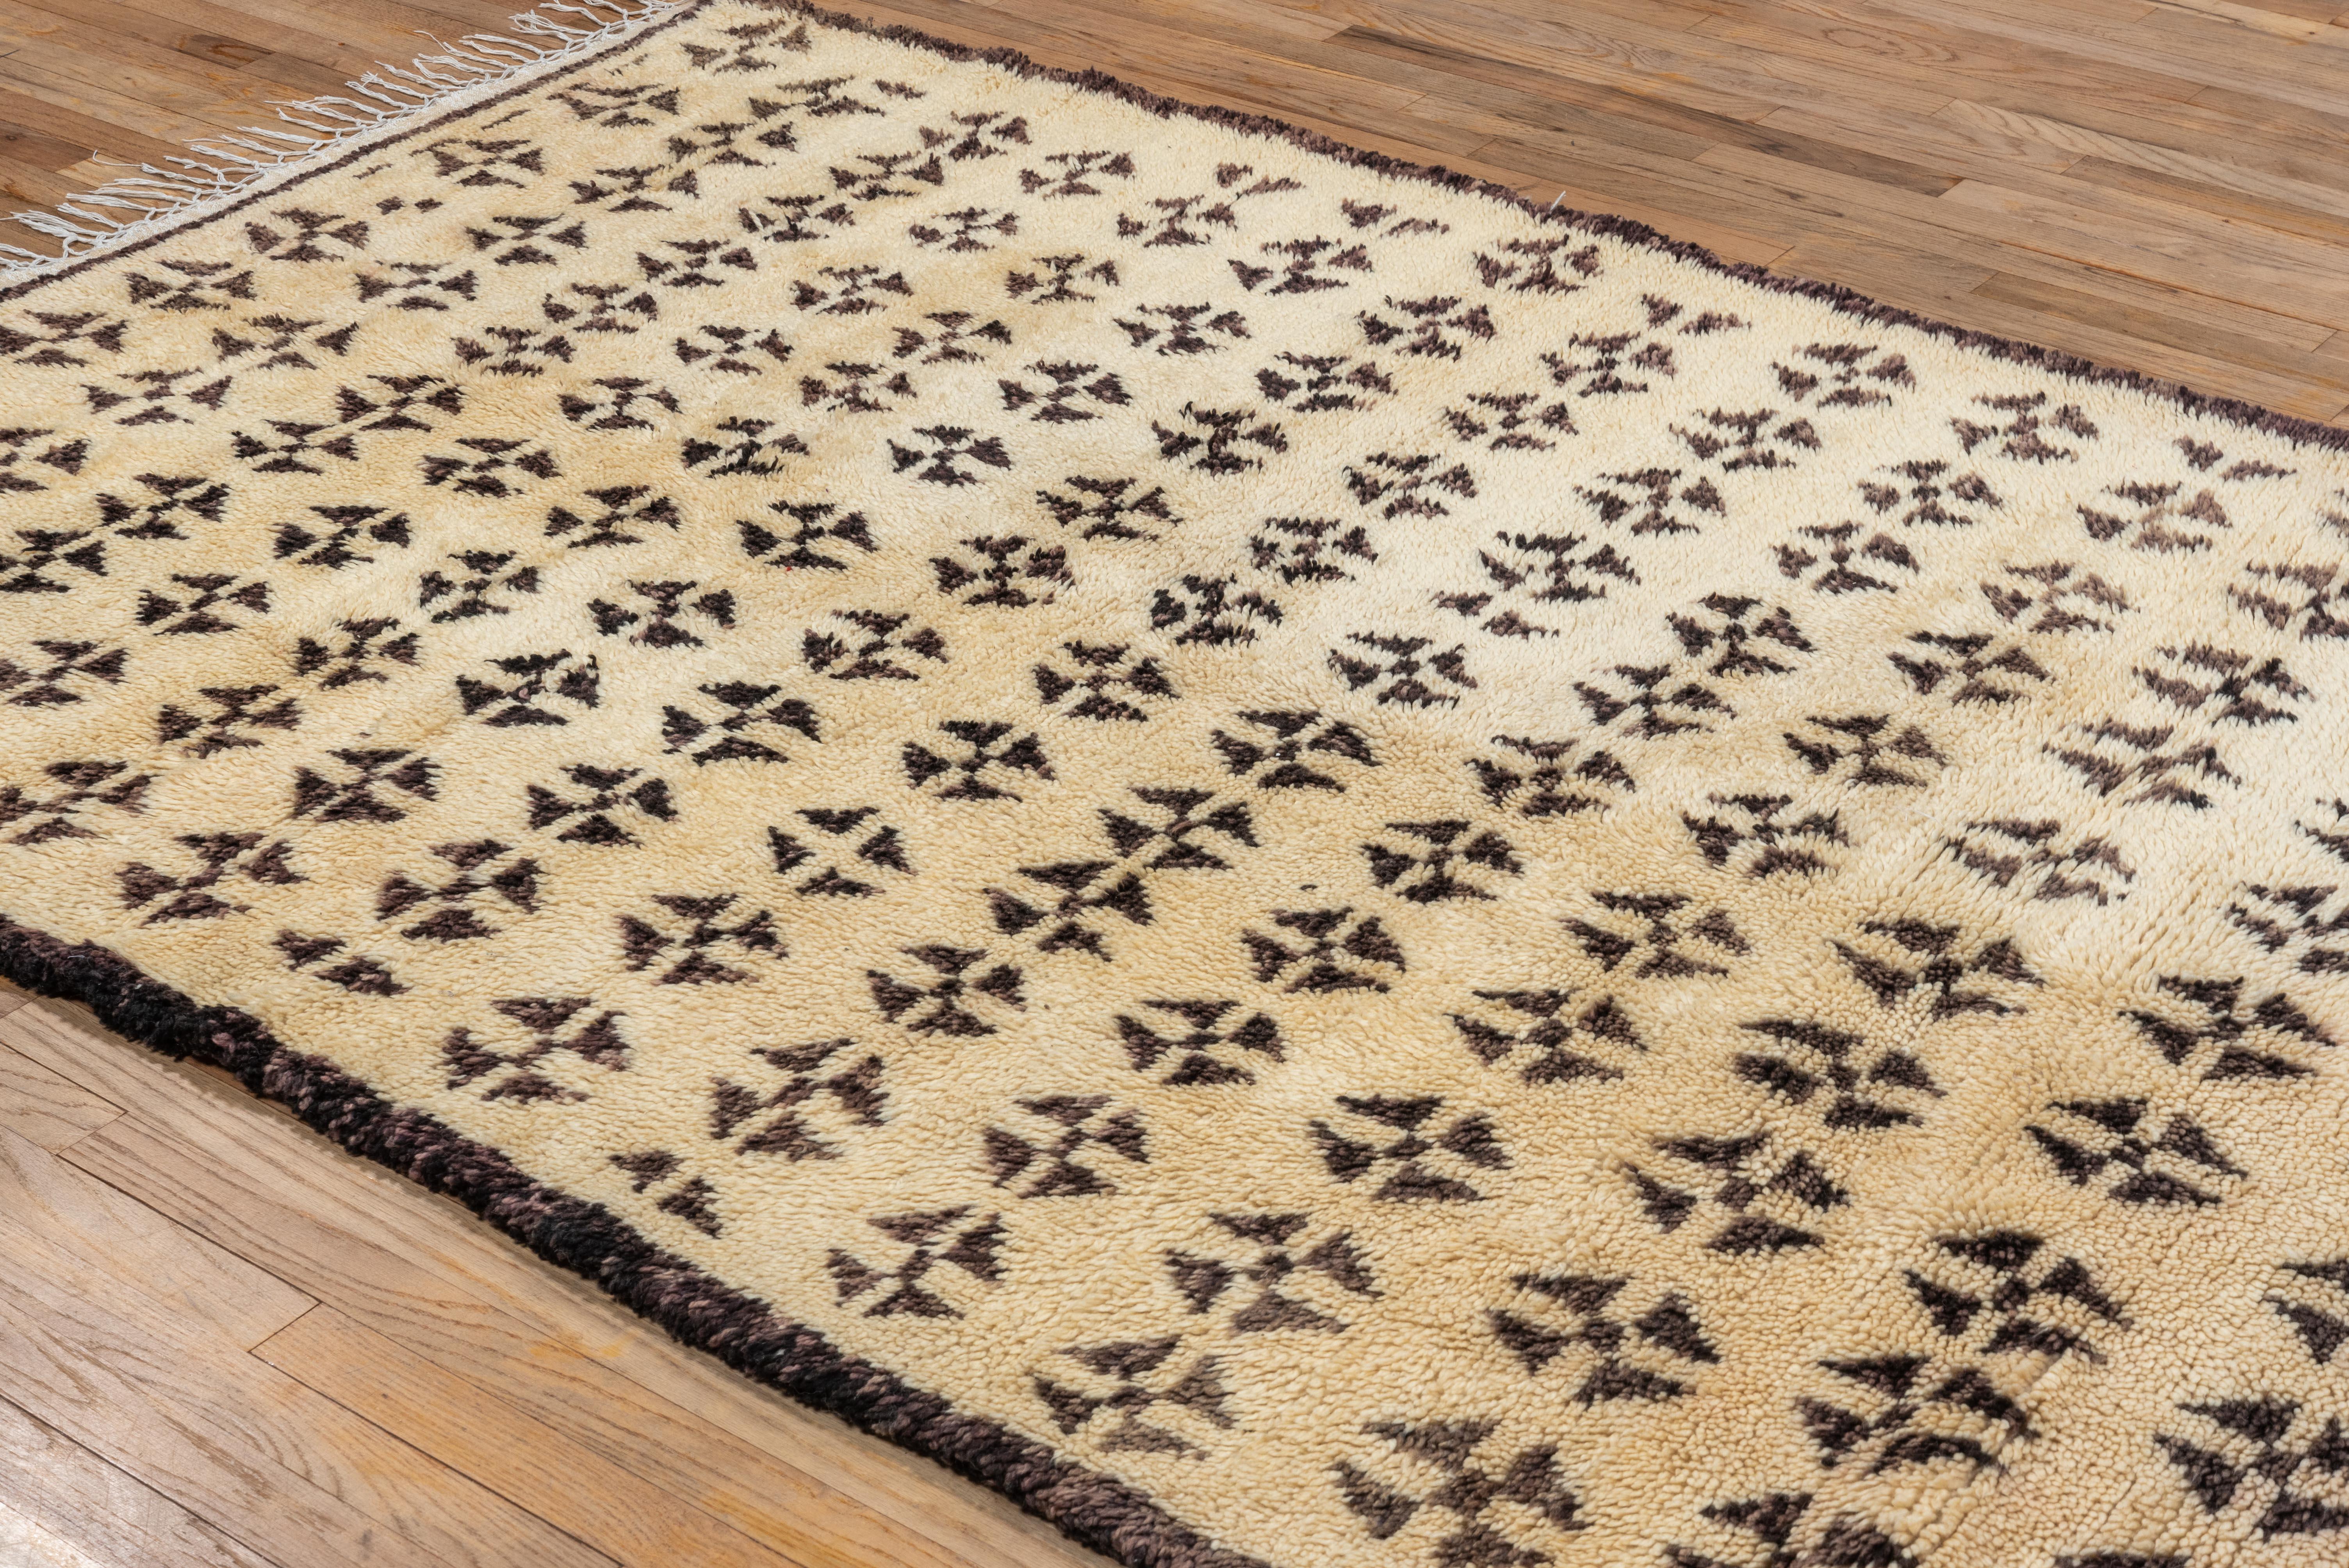 This rug features repeating floral/diamond shaped symbols - a wonderful, minimalist piece that also makes a statement. 
Please inquire with any questions - we'd love to answer all of them.